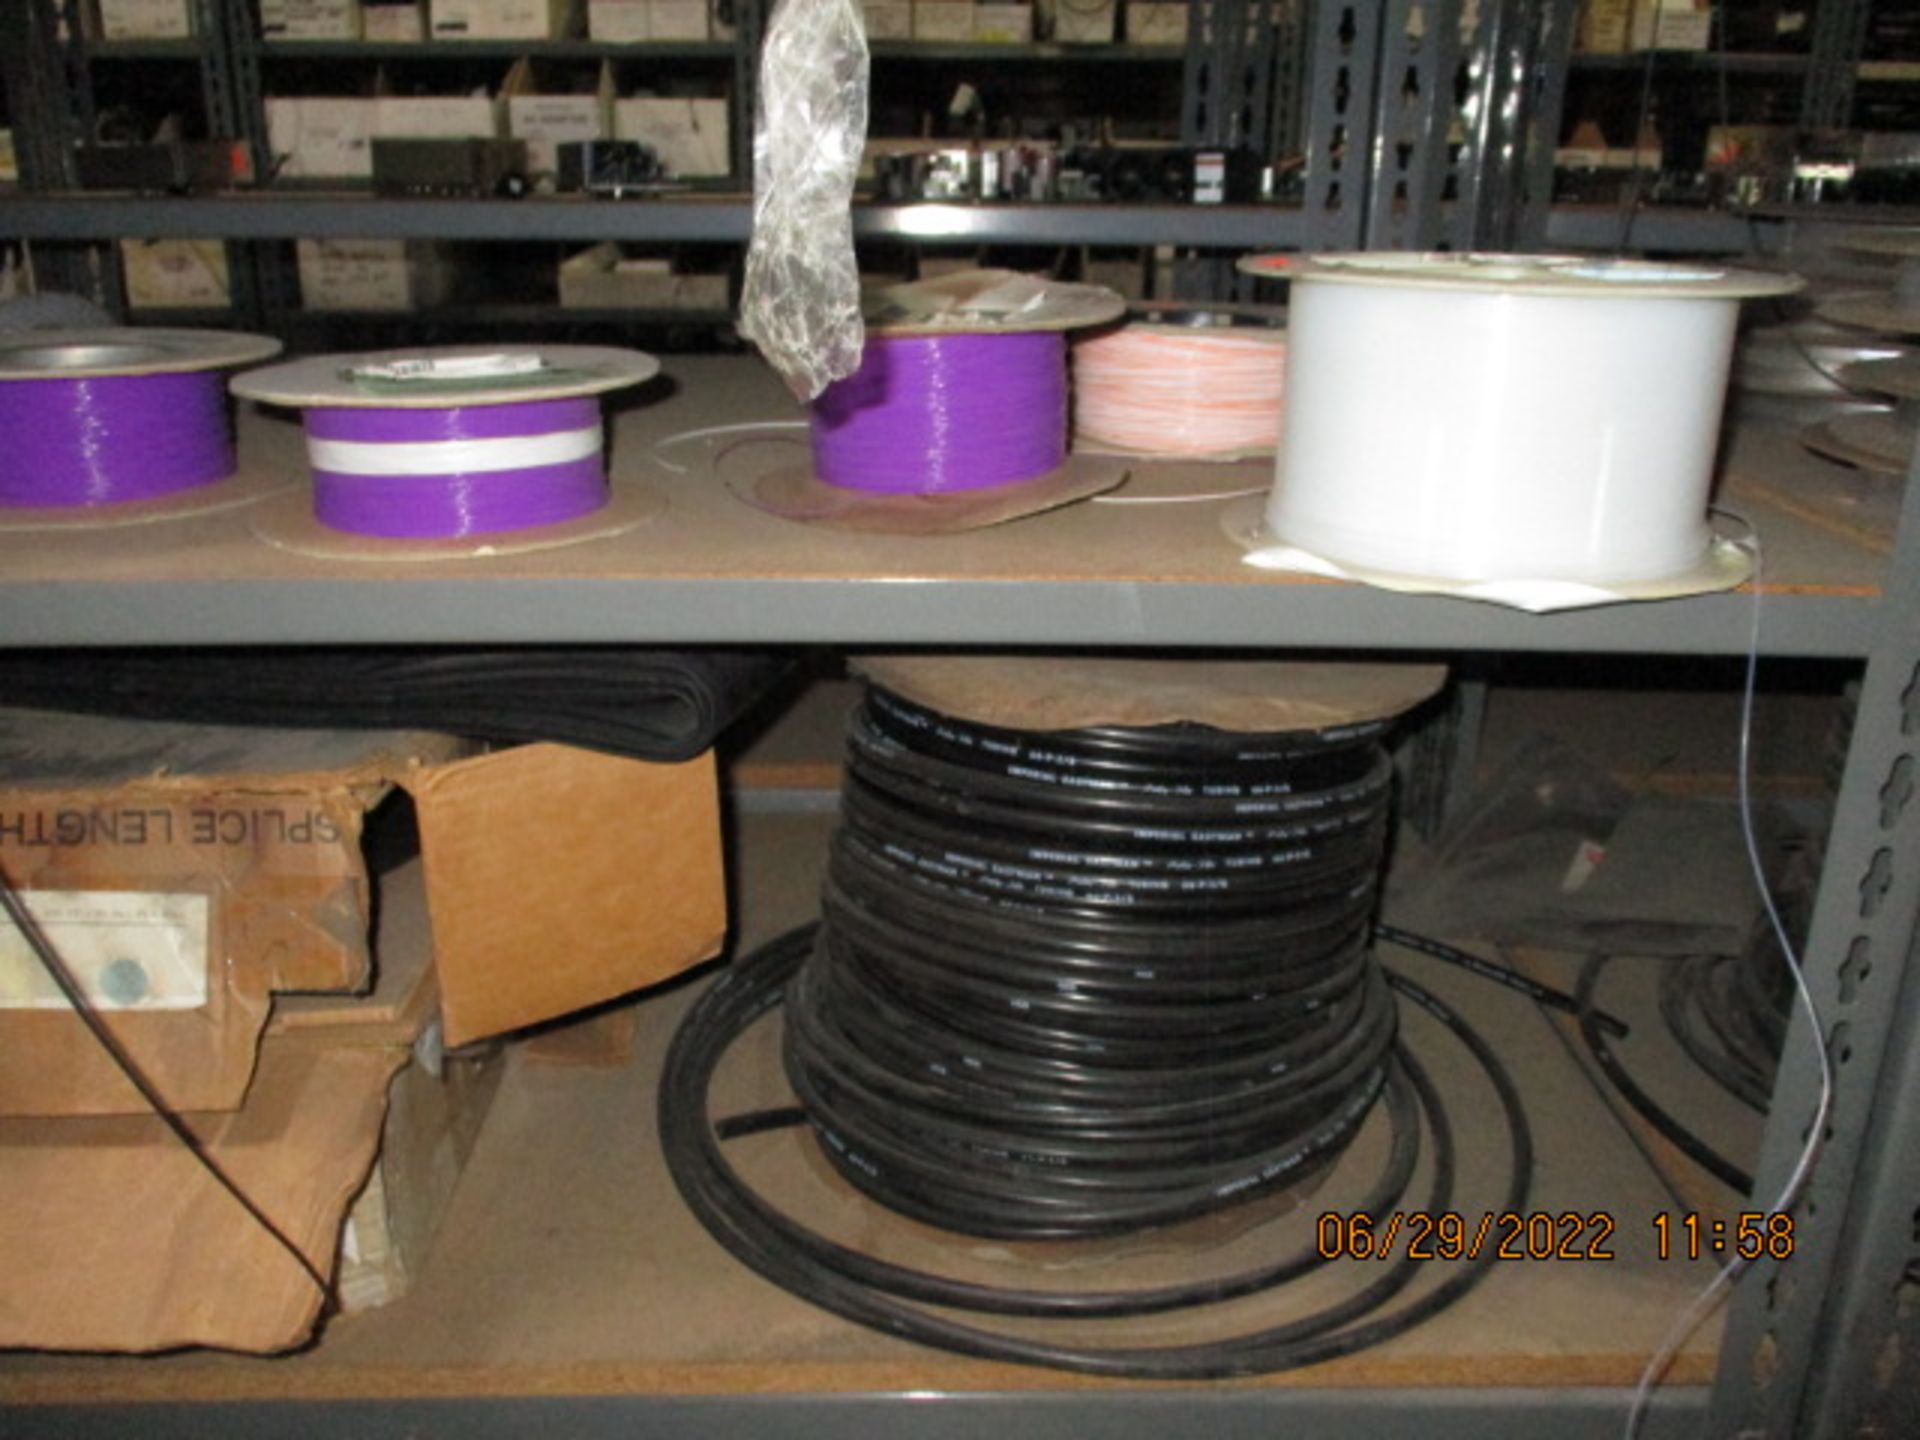 CONTENTS OF SHELVING UNIT CONSISTING OF ASSORTMENT OF TUBING AND HEATSINKS - Image 15 of 15